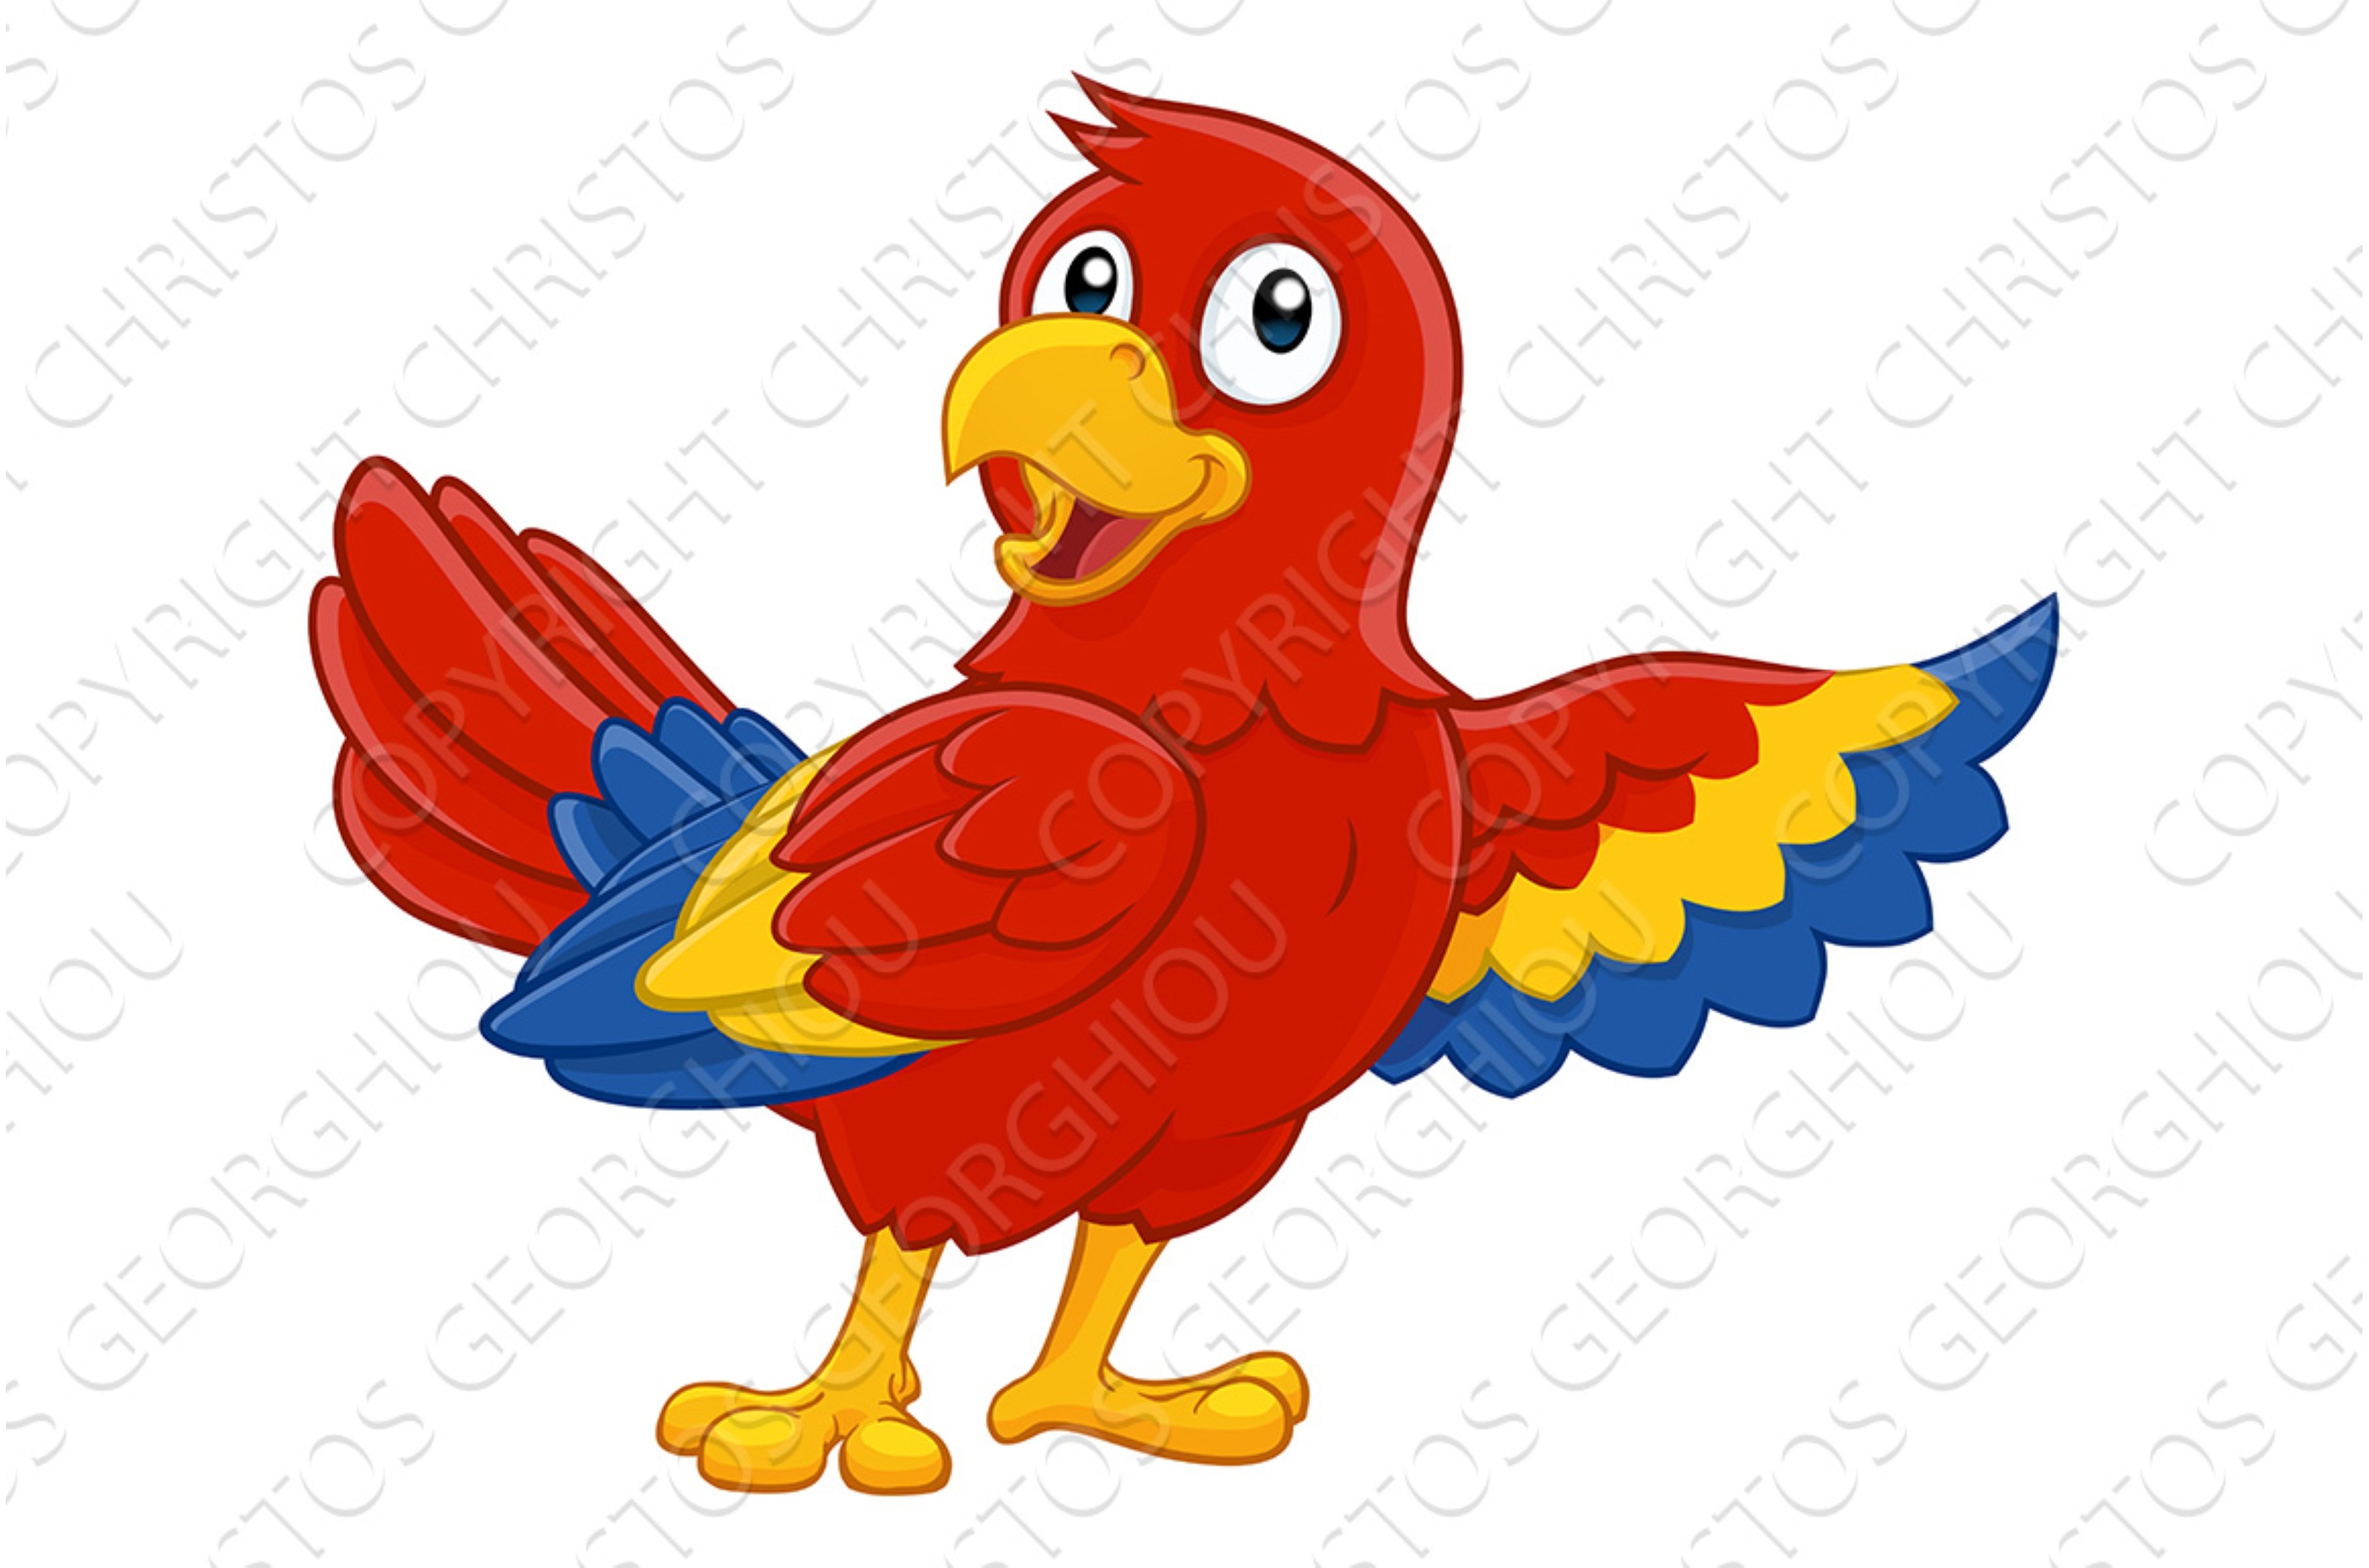 Parrot Red Macaw Bird Cartoon cover image.